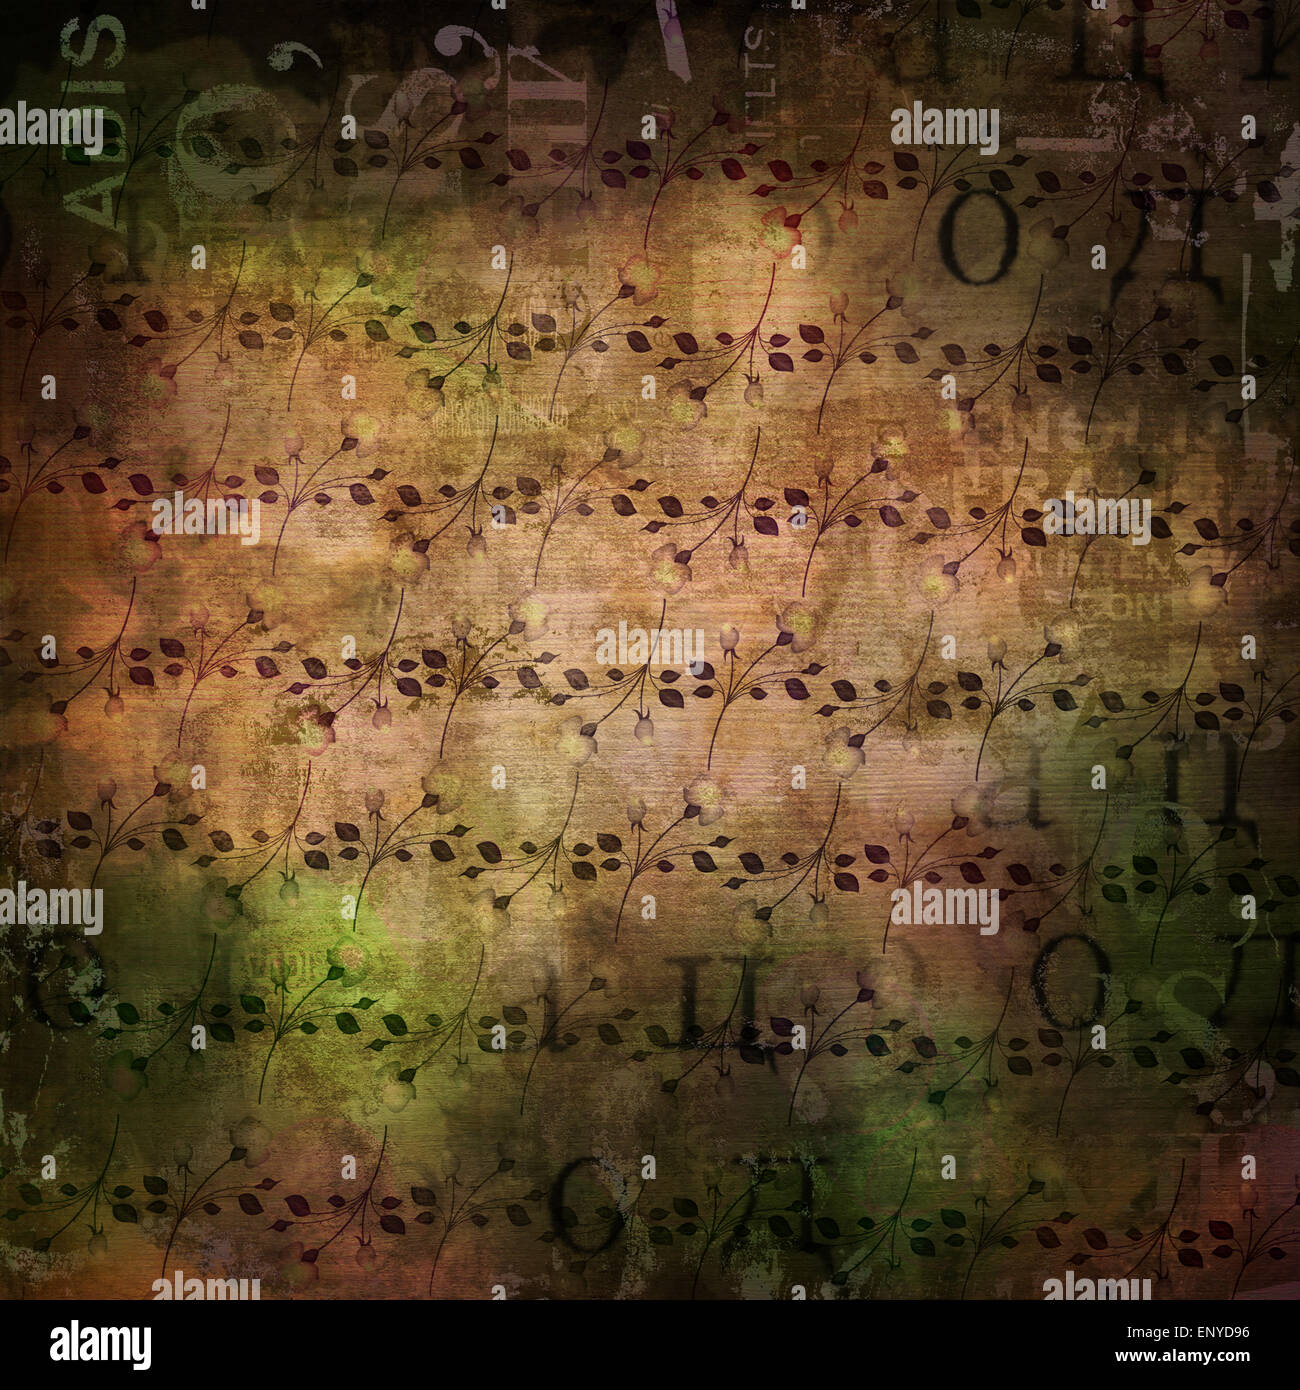 Grunge abstract background with old torn posters with blur text Stock Photo